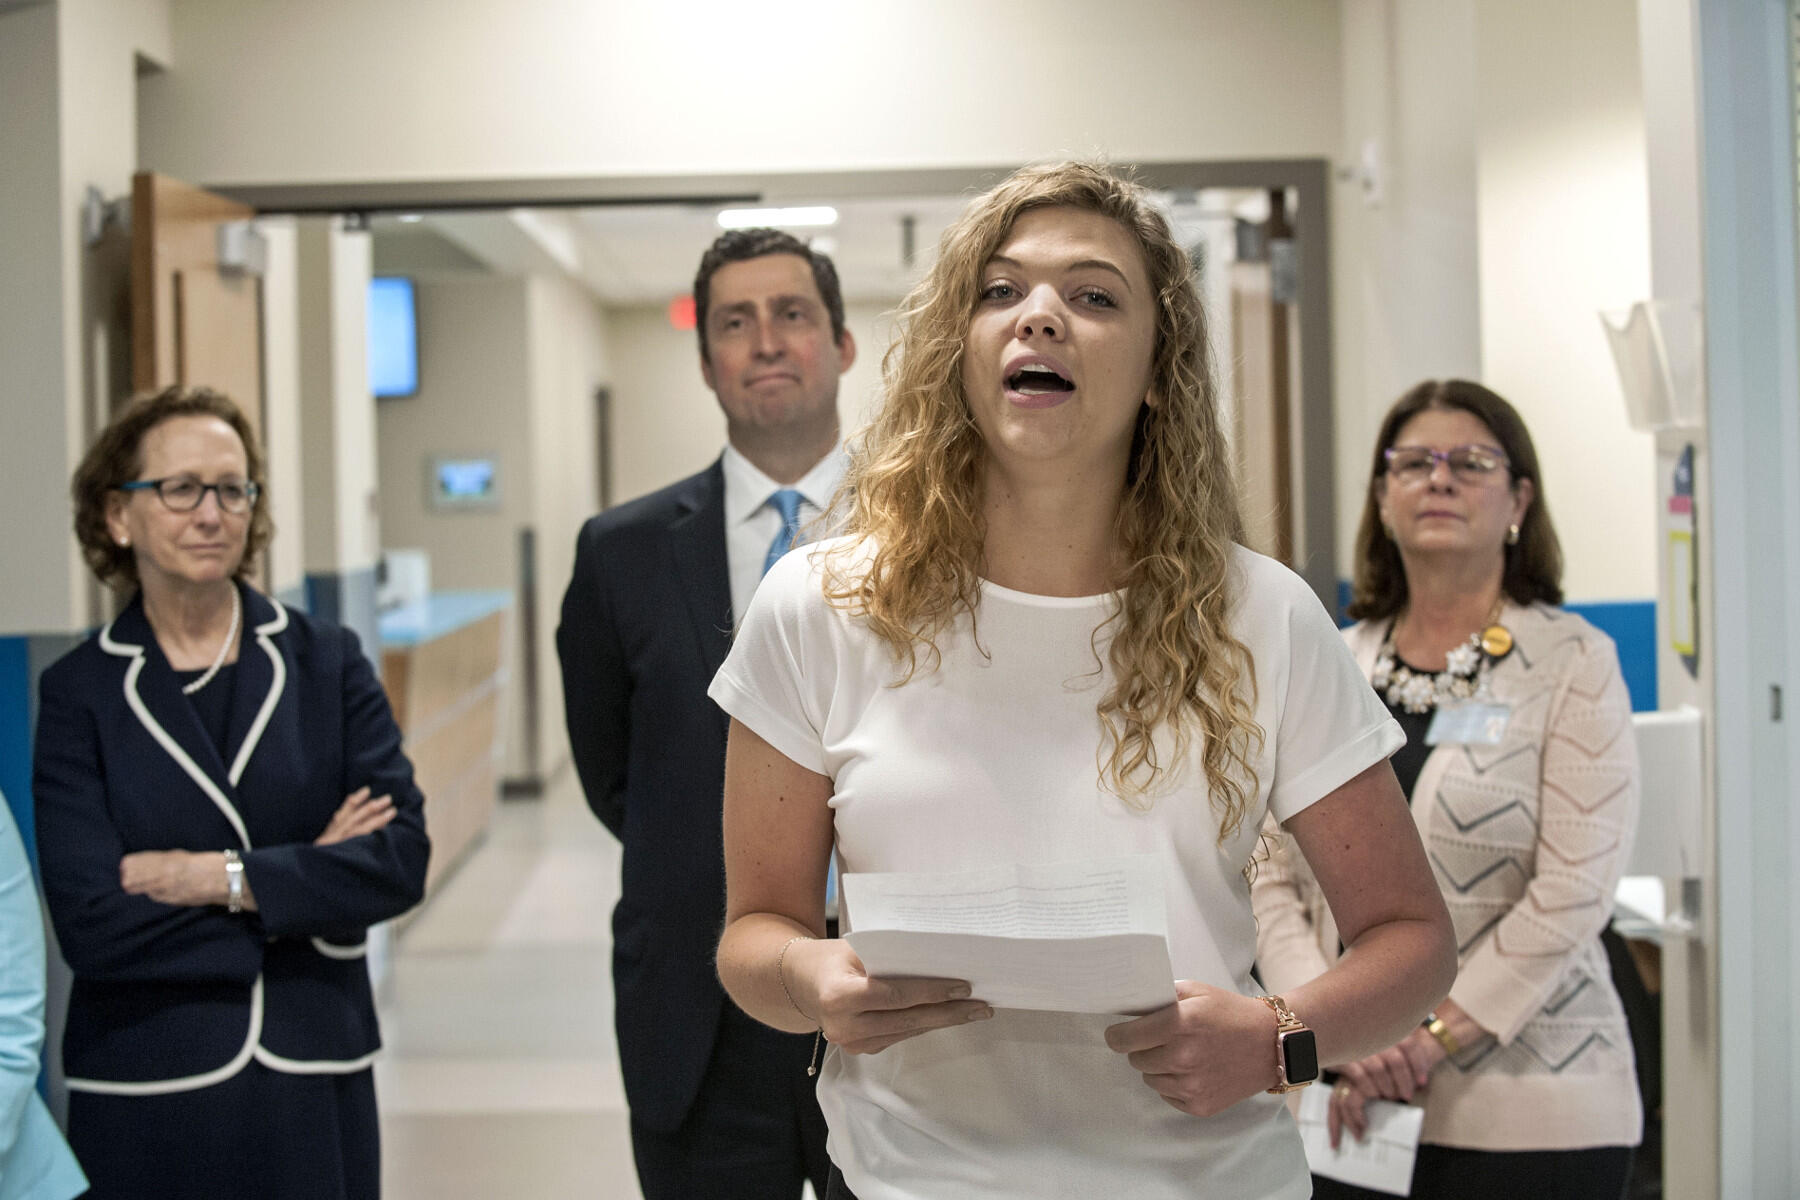 Alexa Nixon spent some of her most difficult days in CHoR's PICU recovering from multiple surgeries during her fight against two brain tumors — first in 2005 when she was 11 years old, and again seven years later. (Photo by Kevin Morley, University Relations)